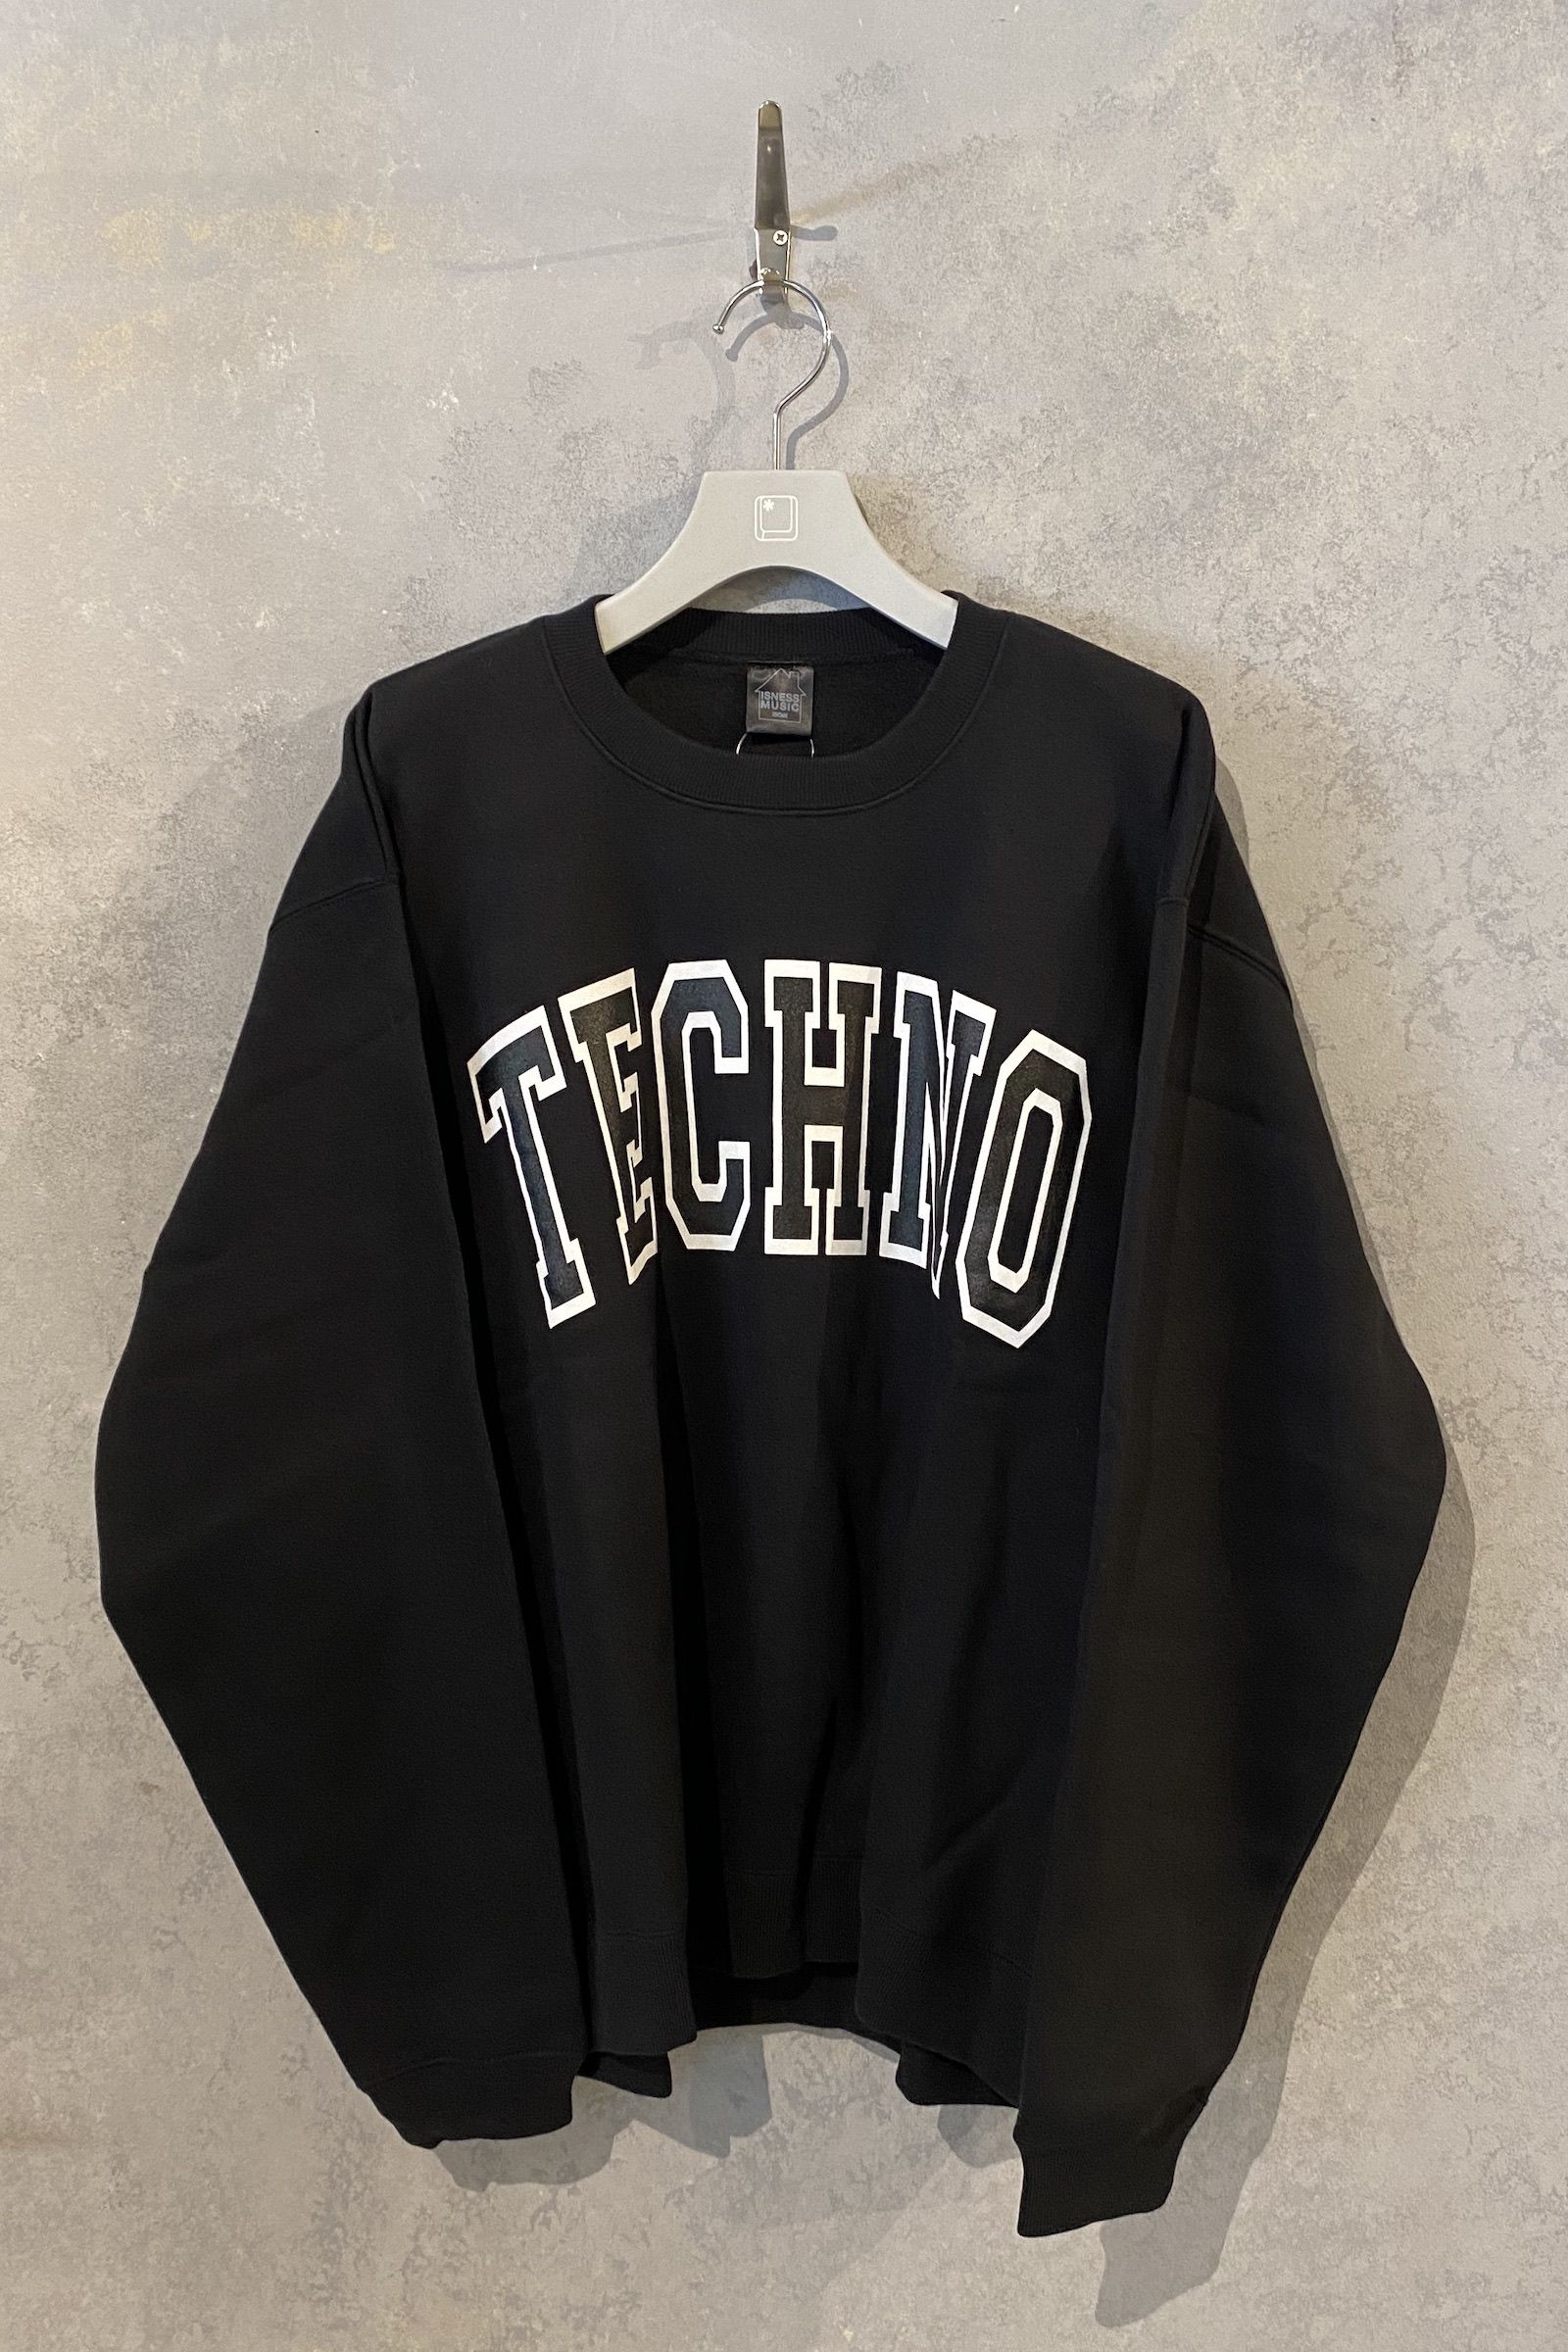 is-ness - is-ness music techno sweat 21aw | asterisk